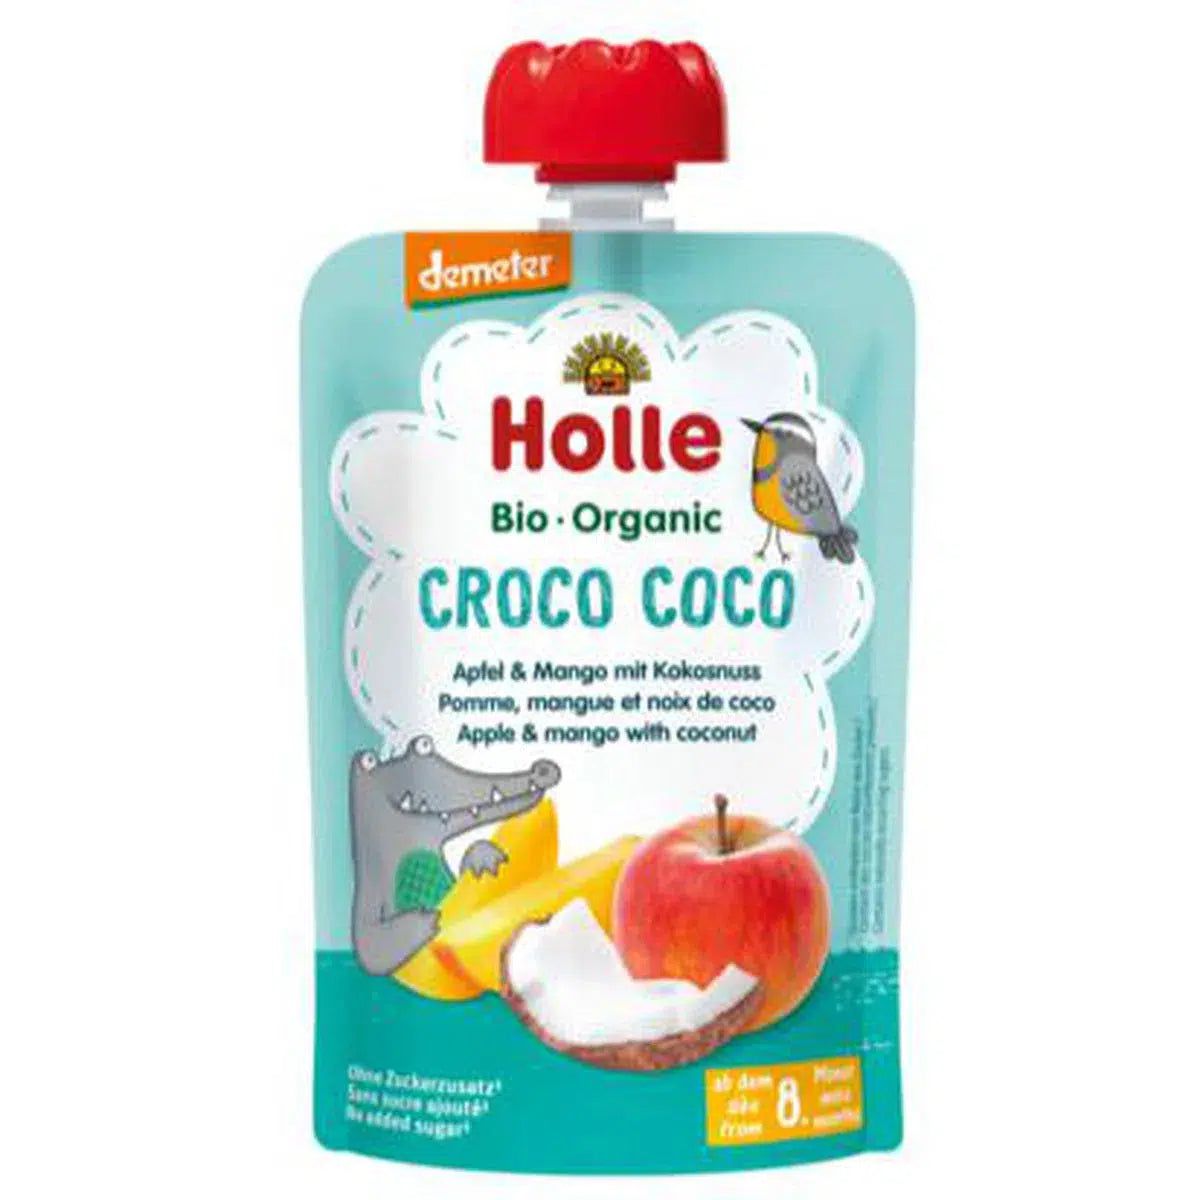 Croco Coco - Apple & Mango with Coconut (100g), from 8 months